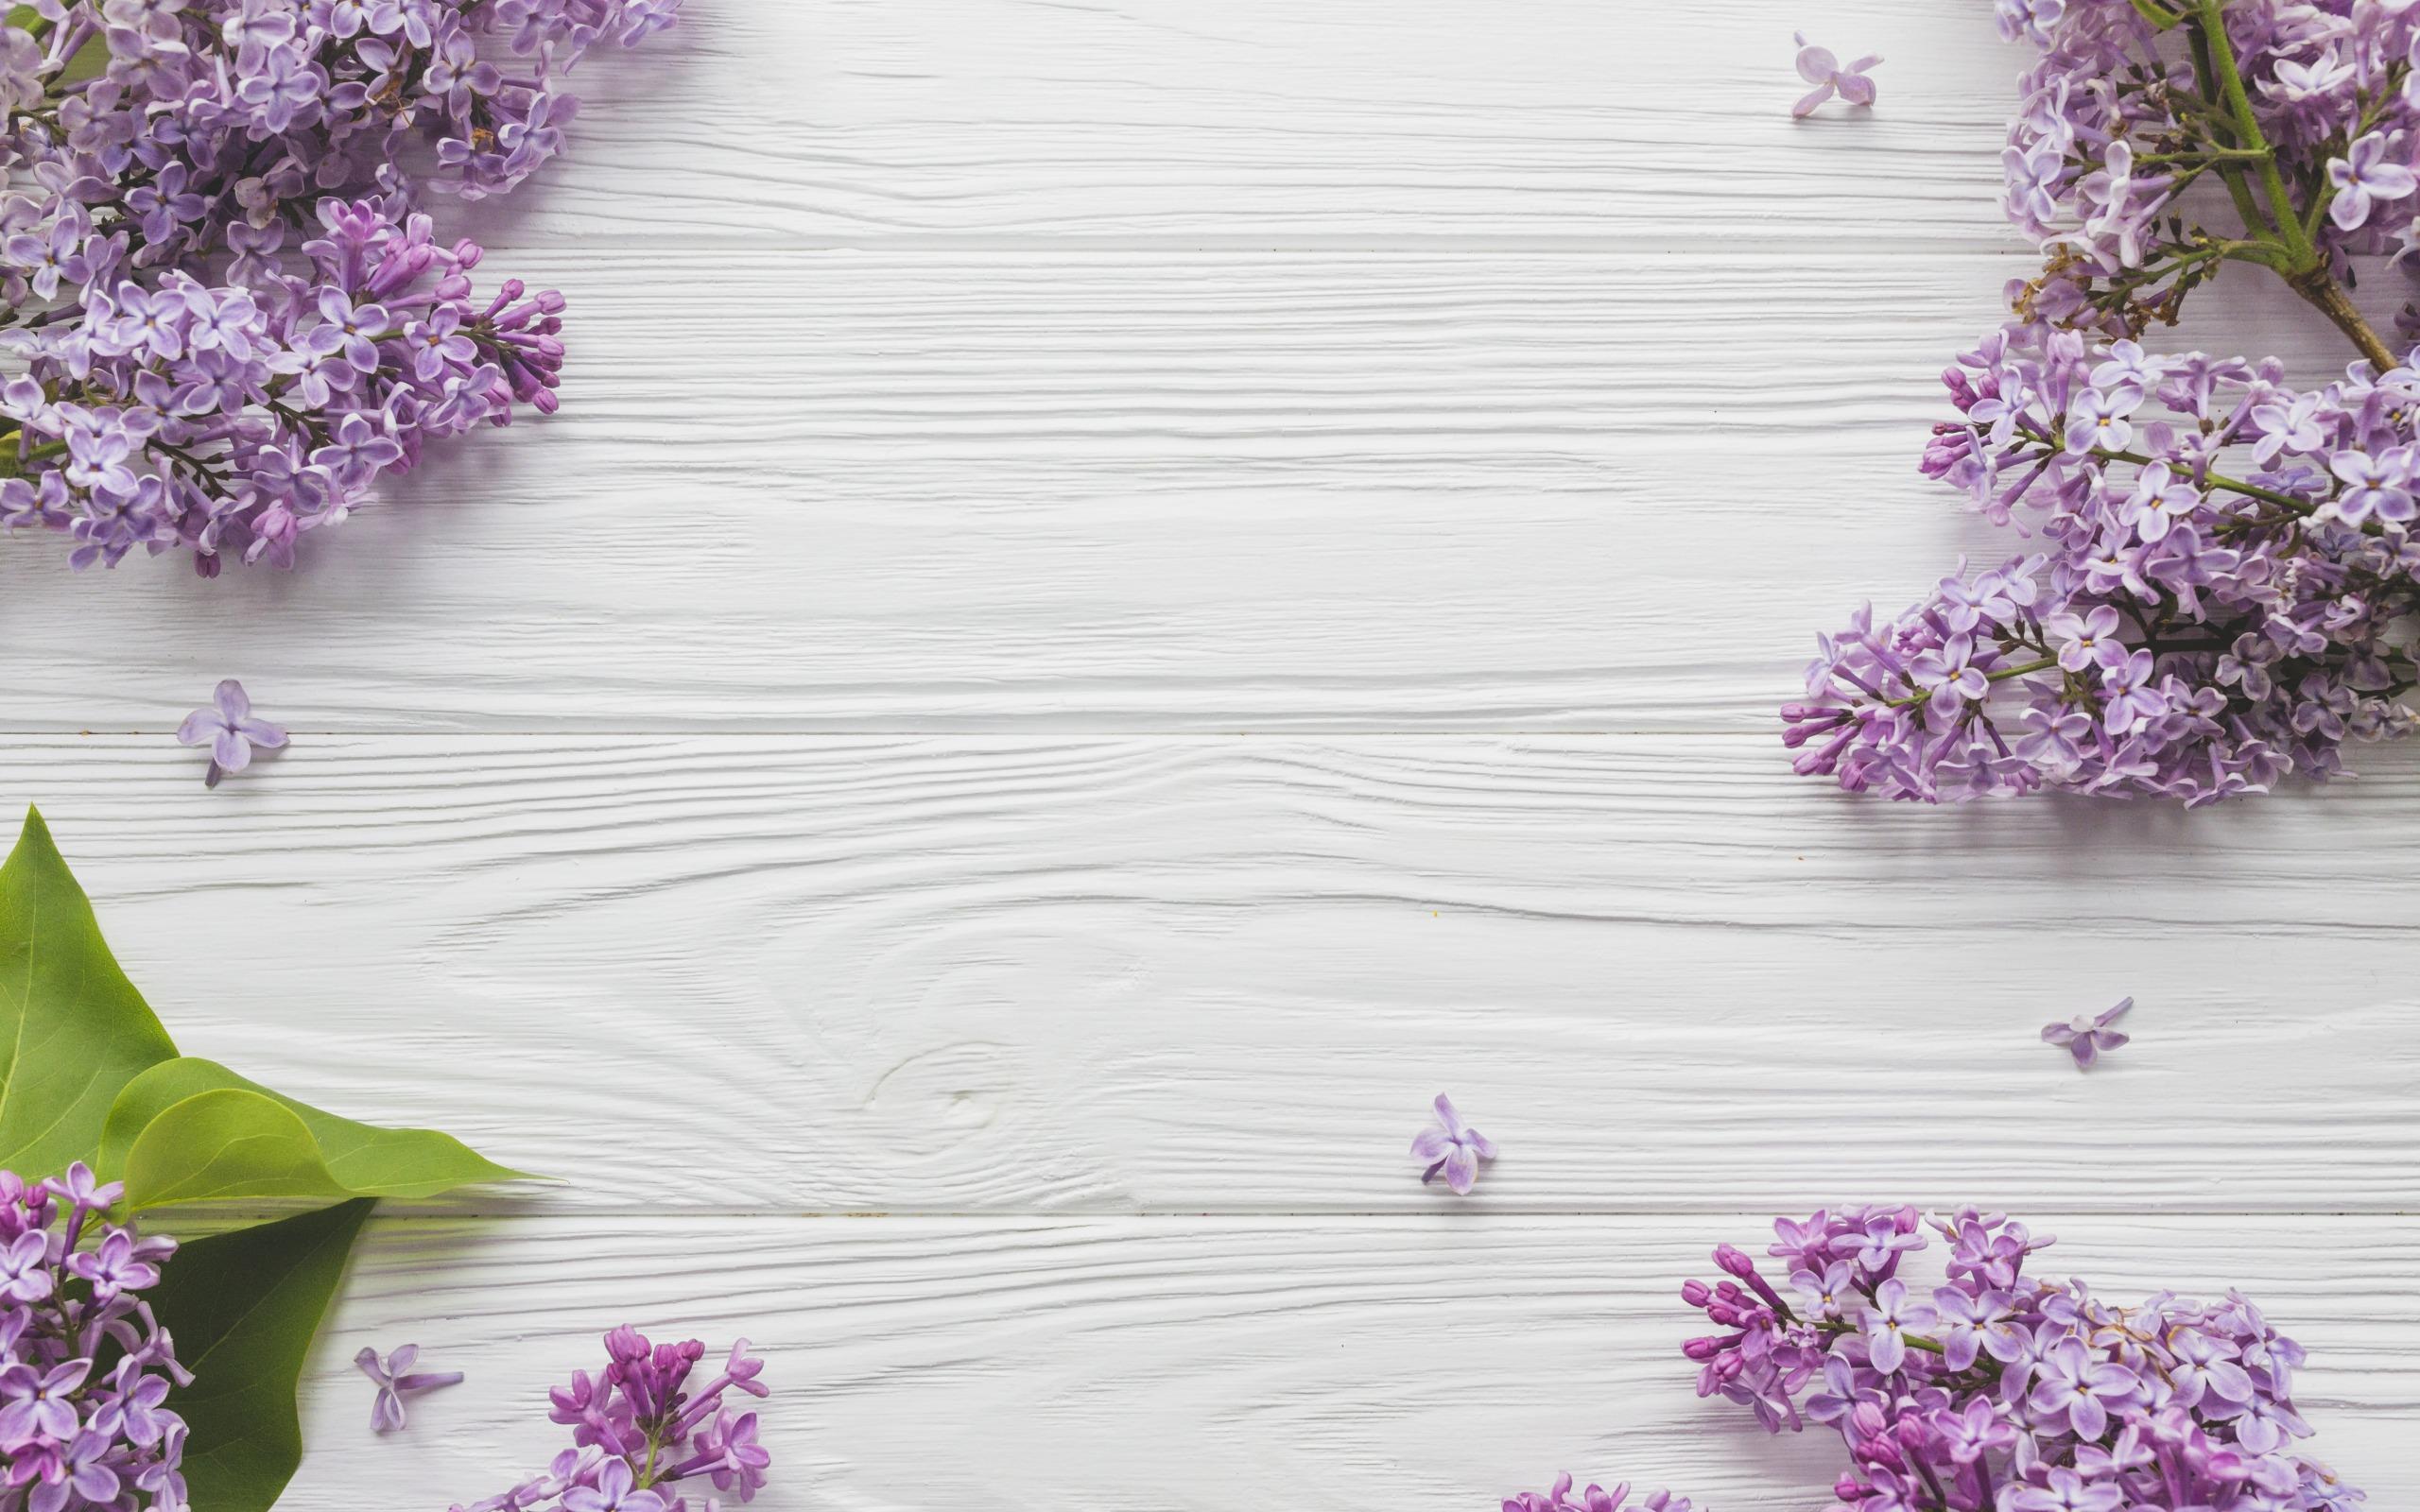 Download wallpaper lilac, light wooden background, spring flowers